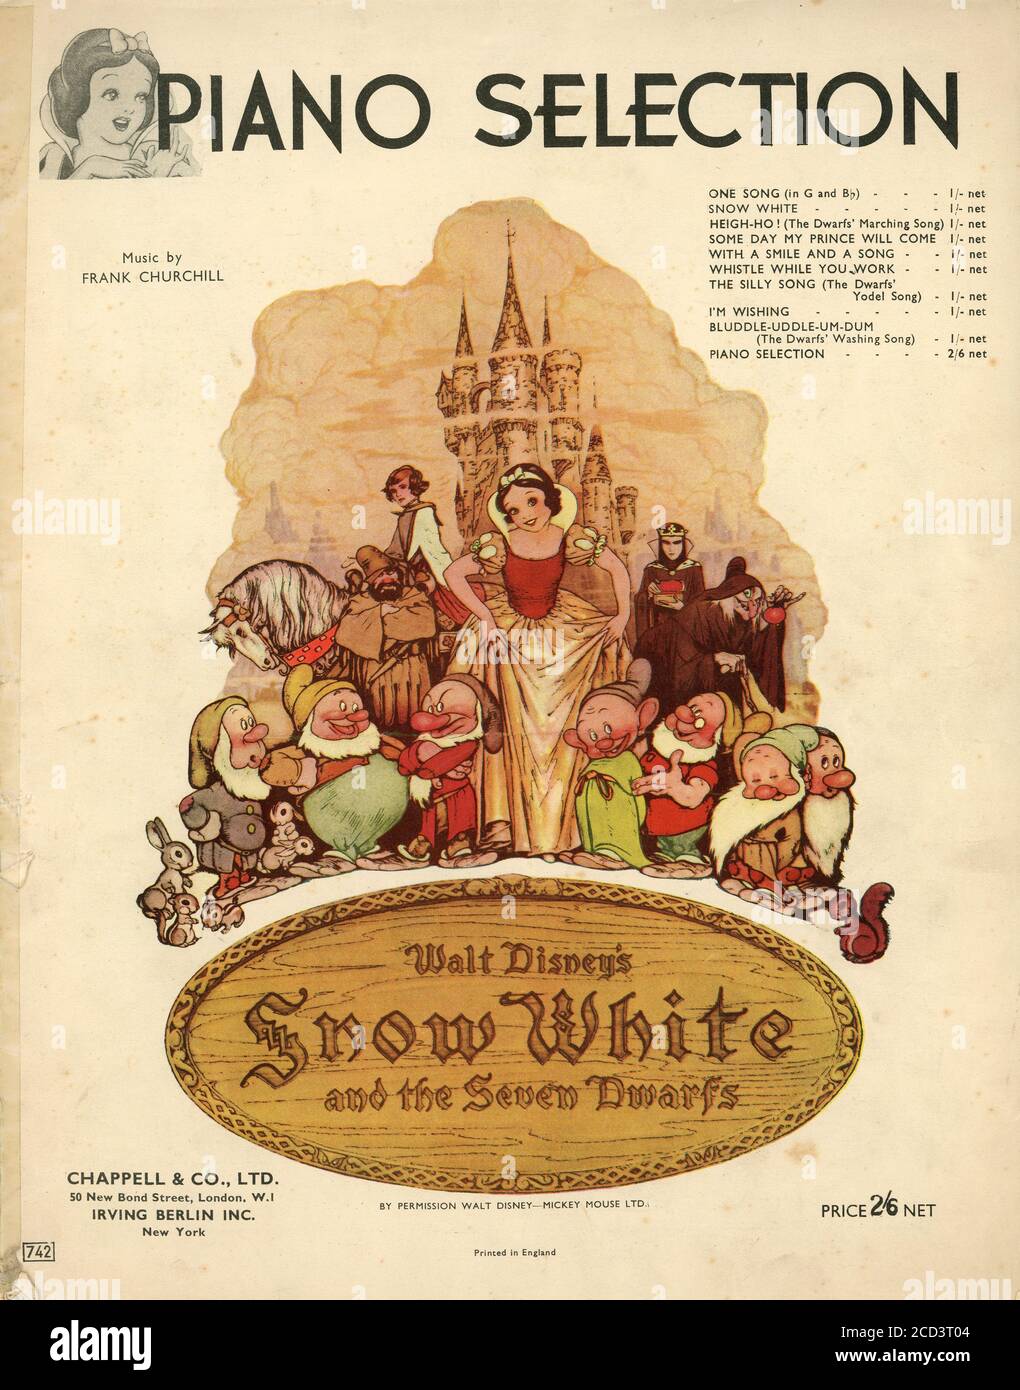 Sheet Music - Piano Selection - from Walt Disney's Snow White - 1937 Stock Photo